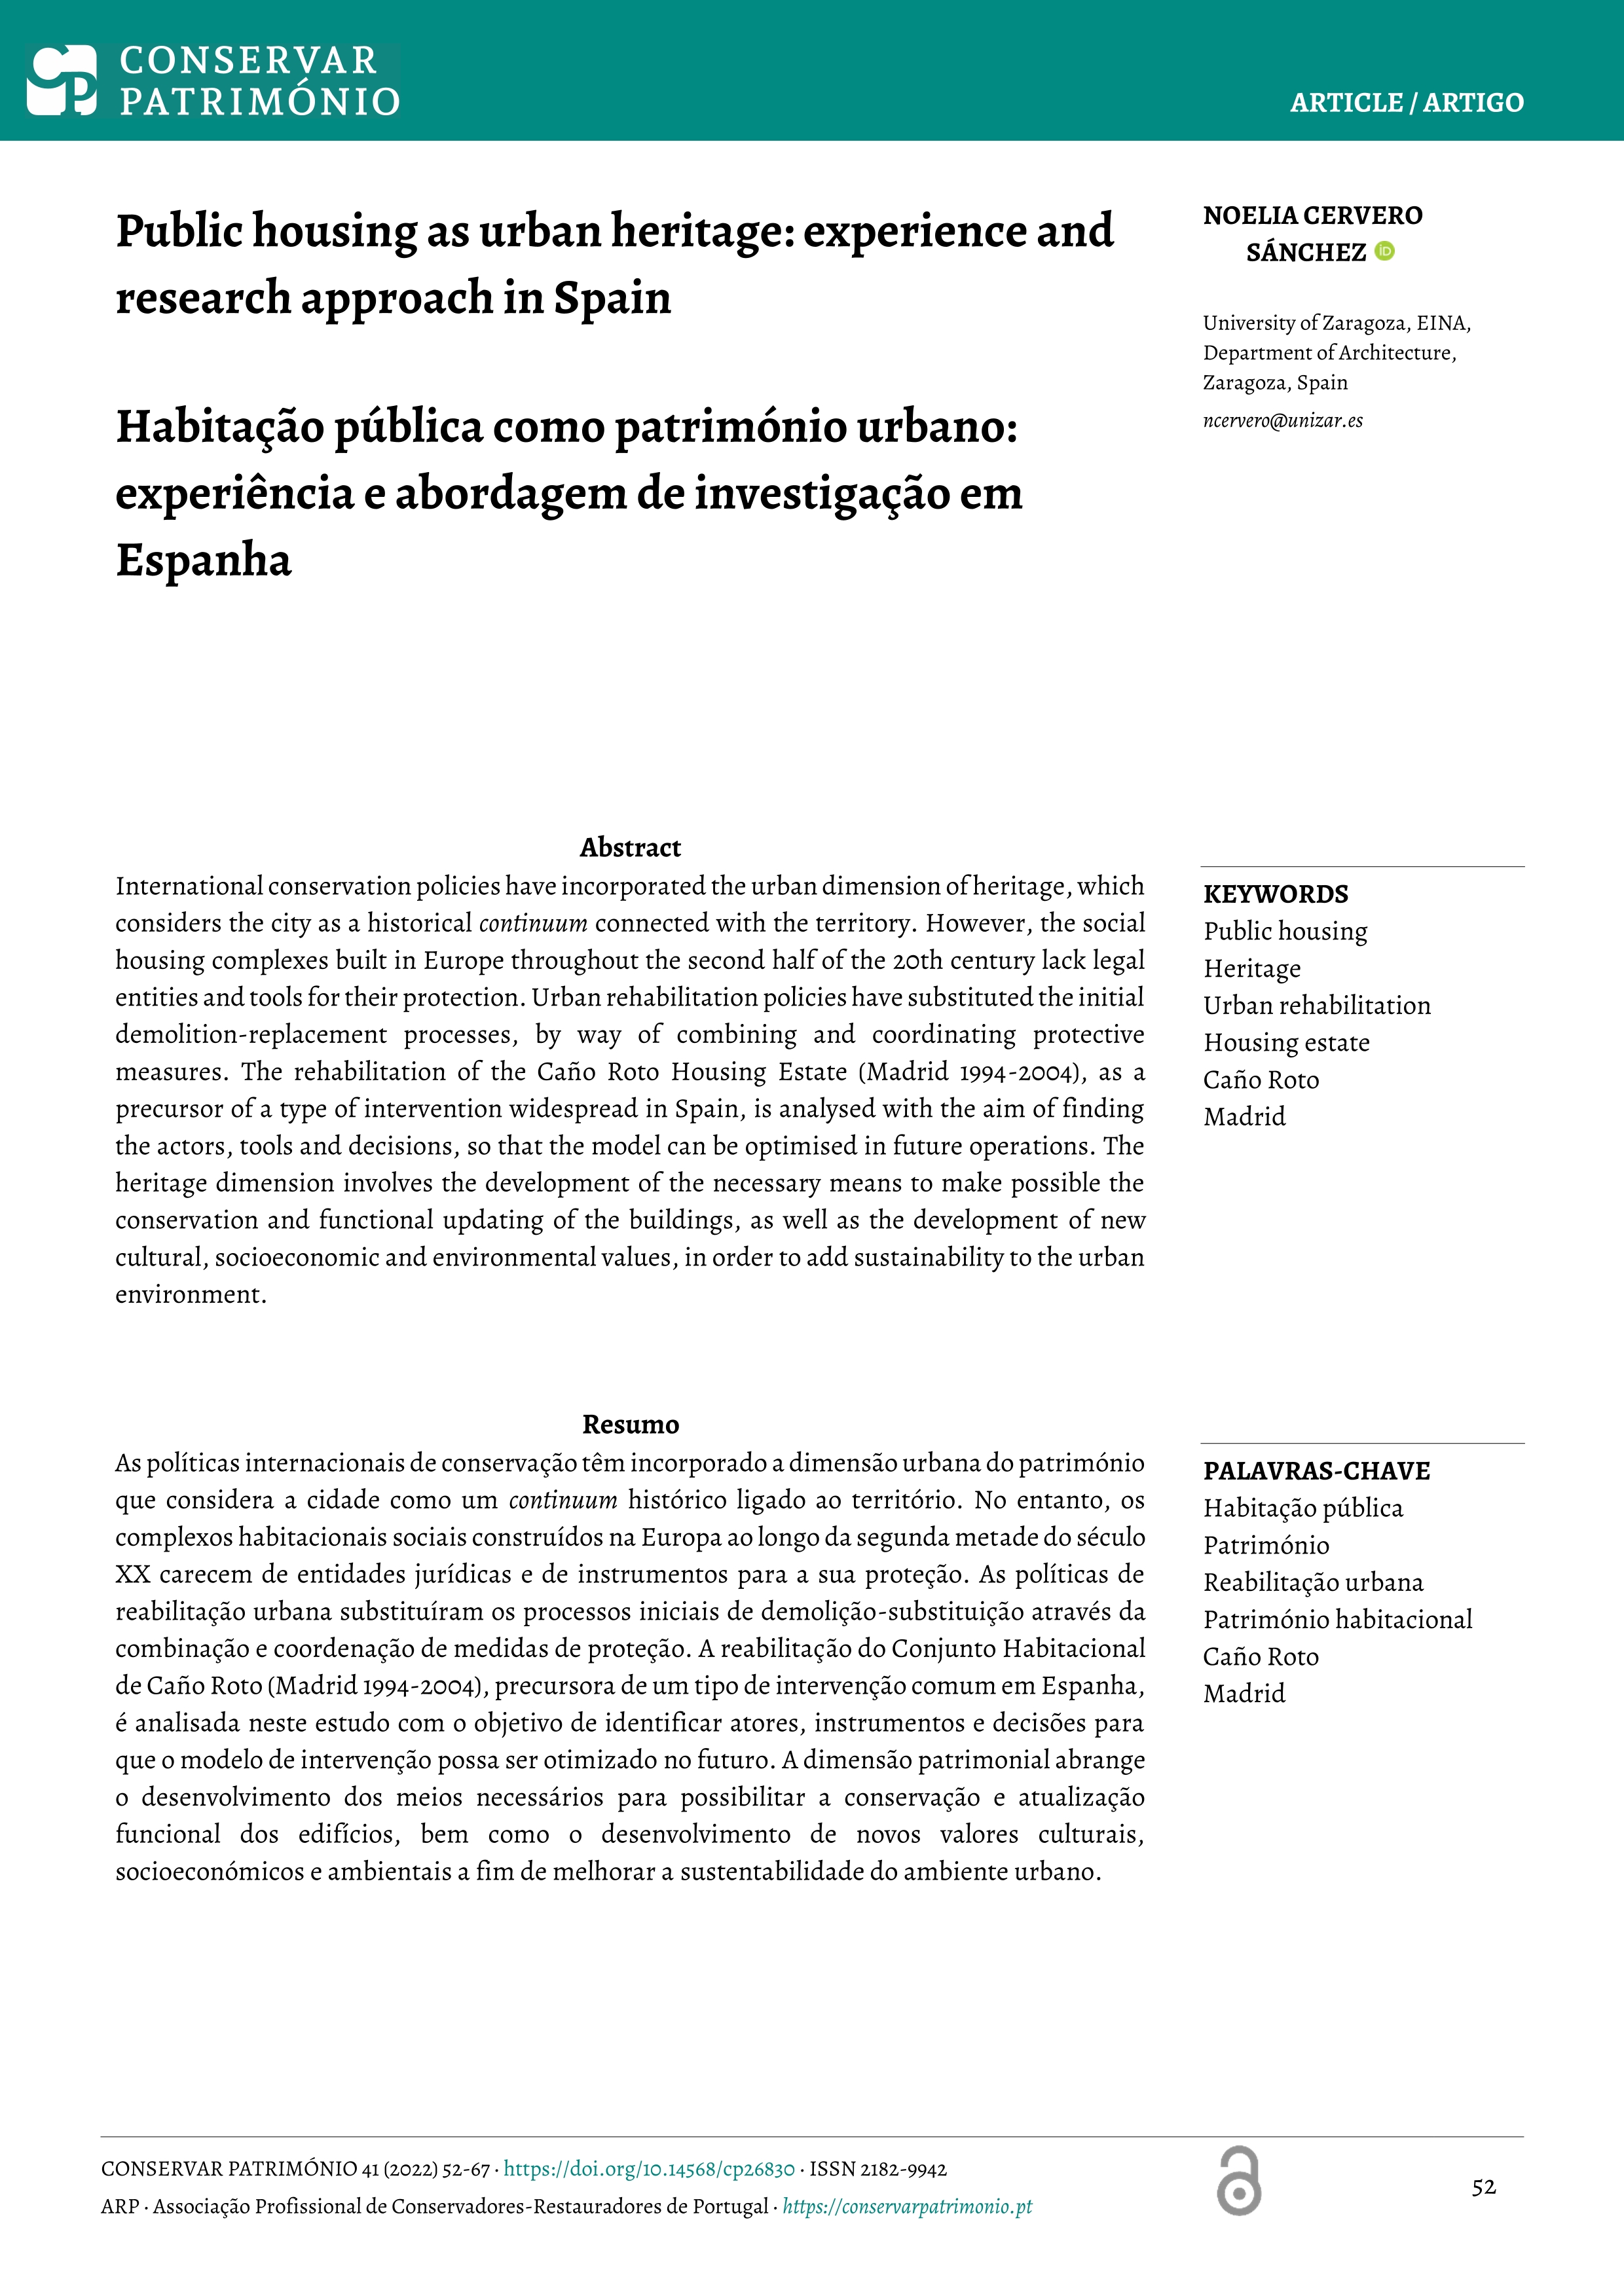 Public housing as urban heritage: experience and research approach in Spain